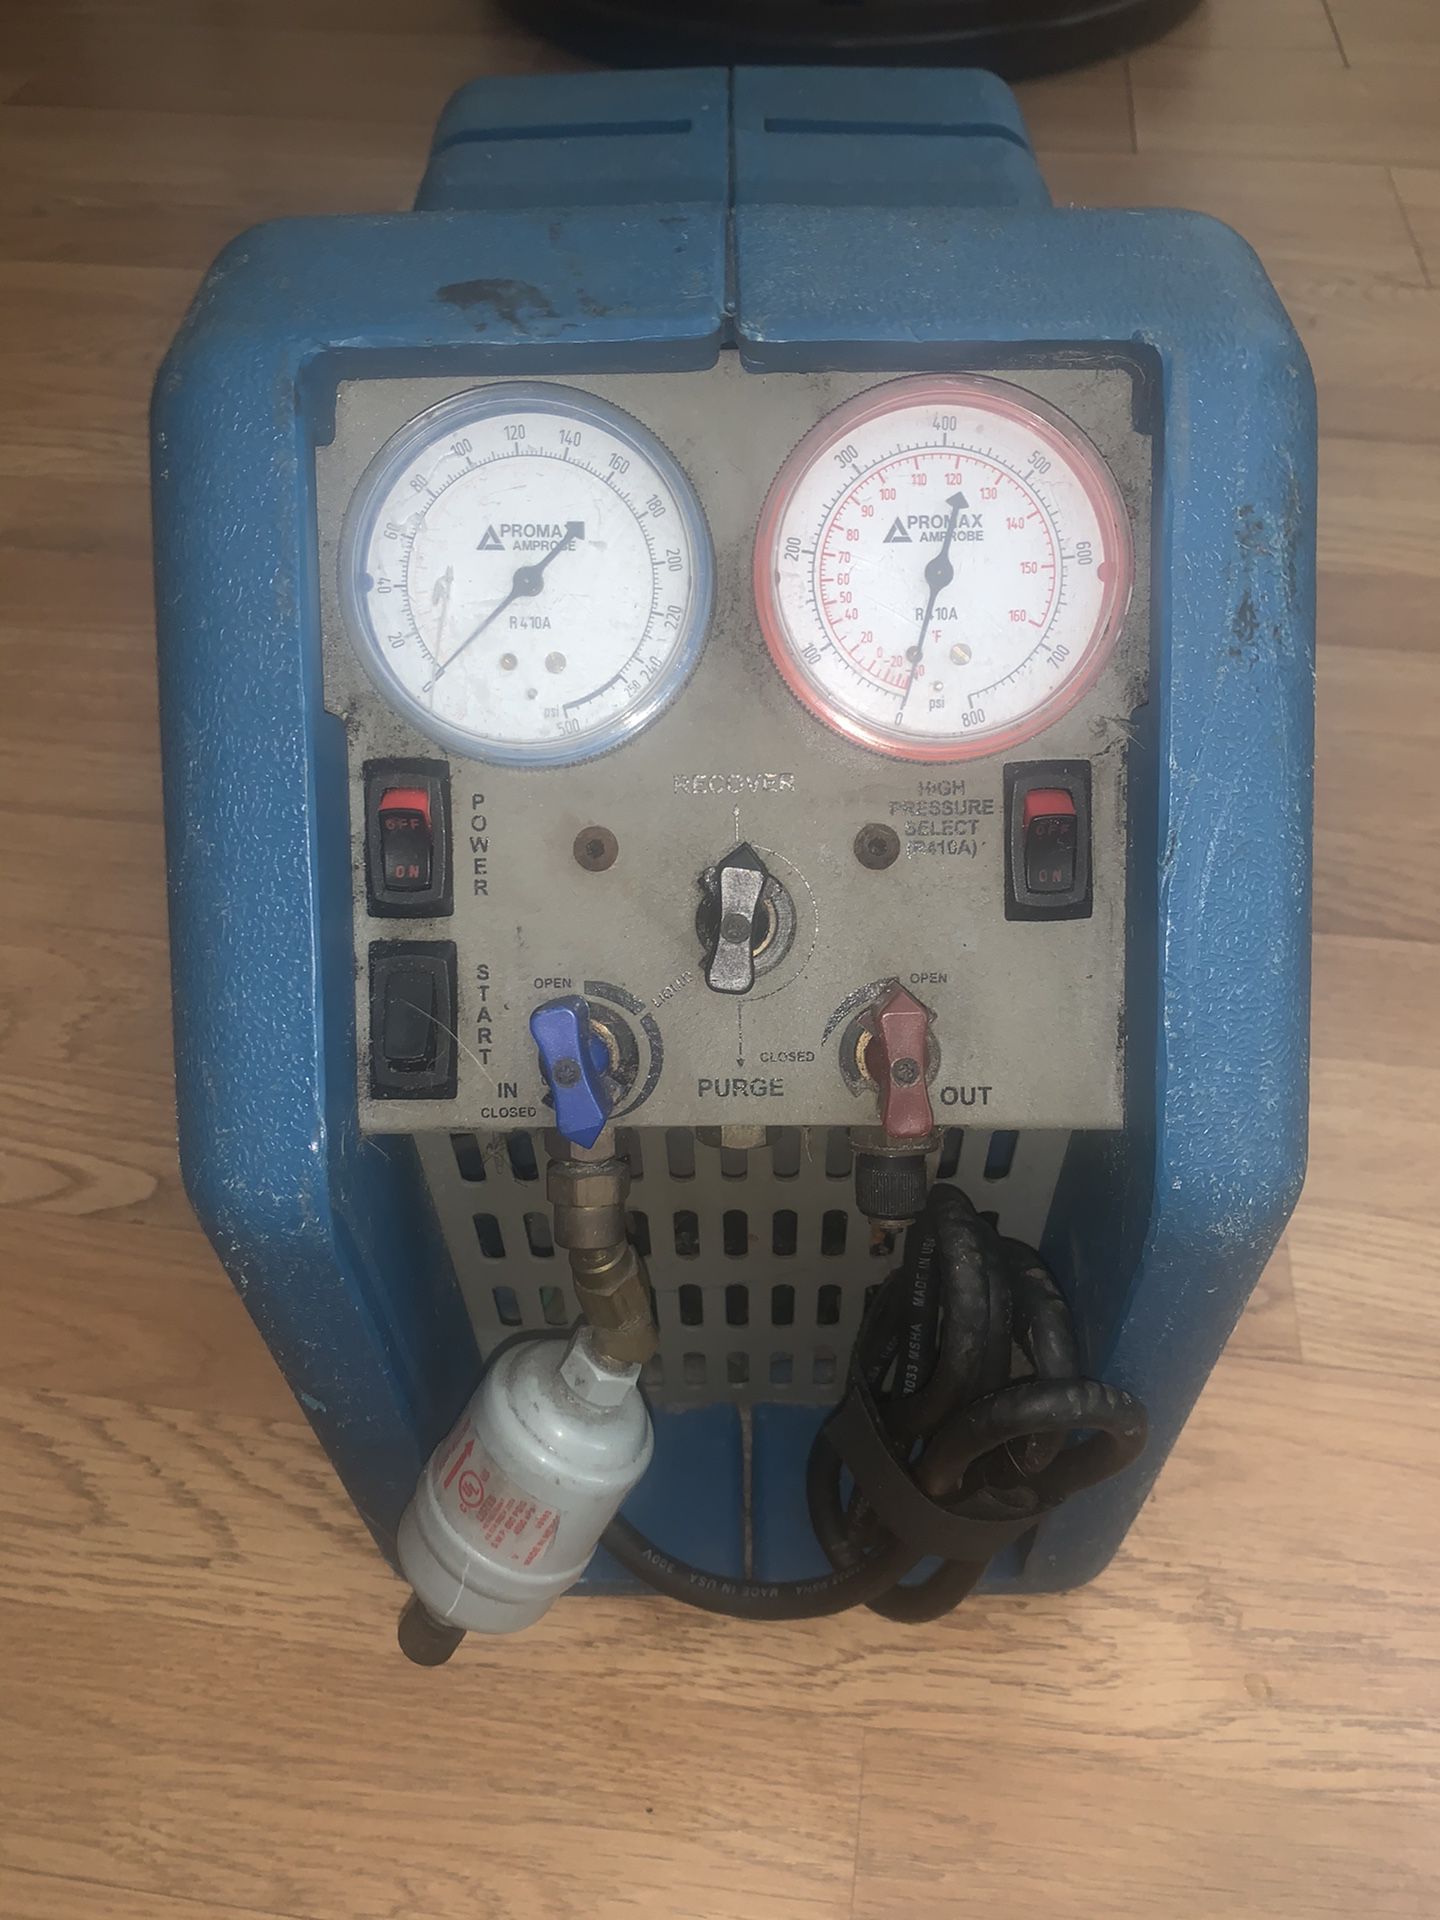 Promax RG5410hp freon recovery unit